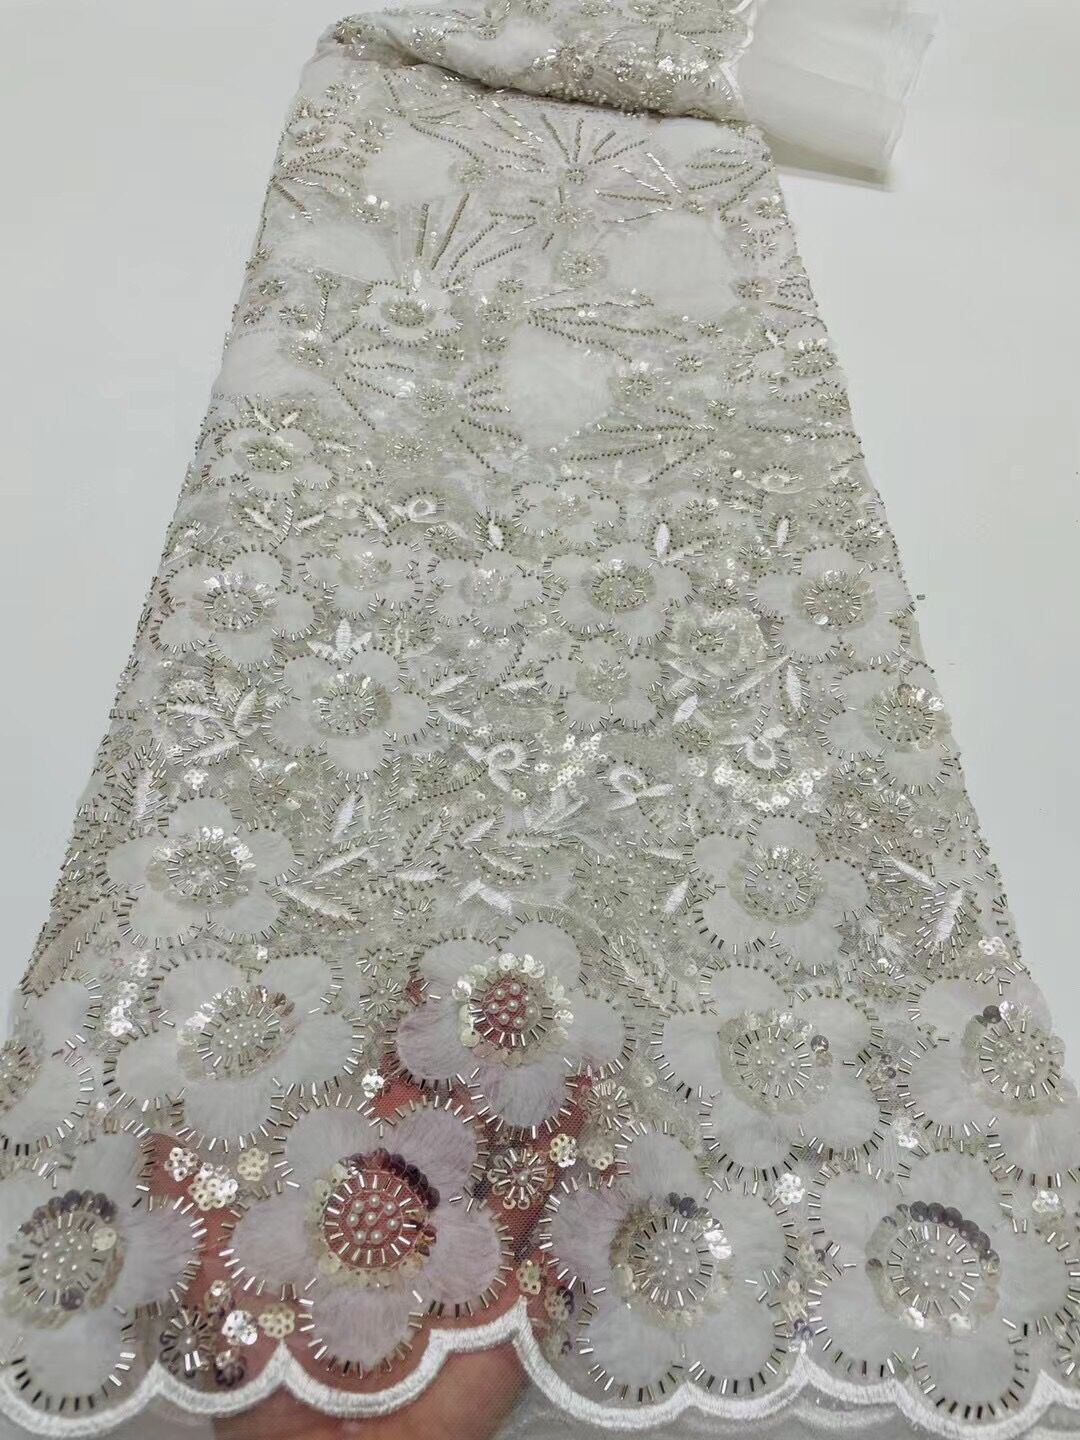 5 YARDS / 14 COLORS / Cute Floral Beaded Glitter Embroidery Mesh Lace Wedding Party Dress Fabric - Classic & Modern